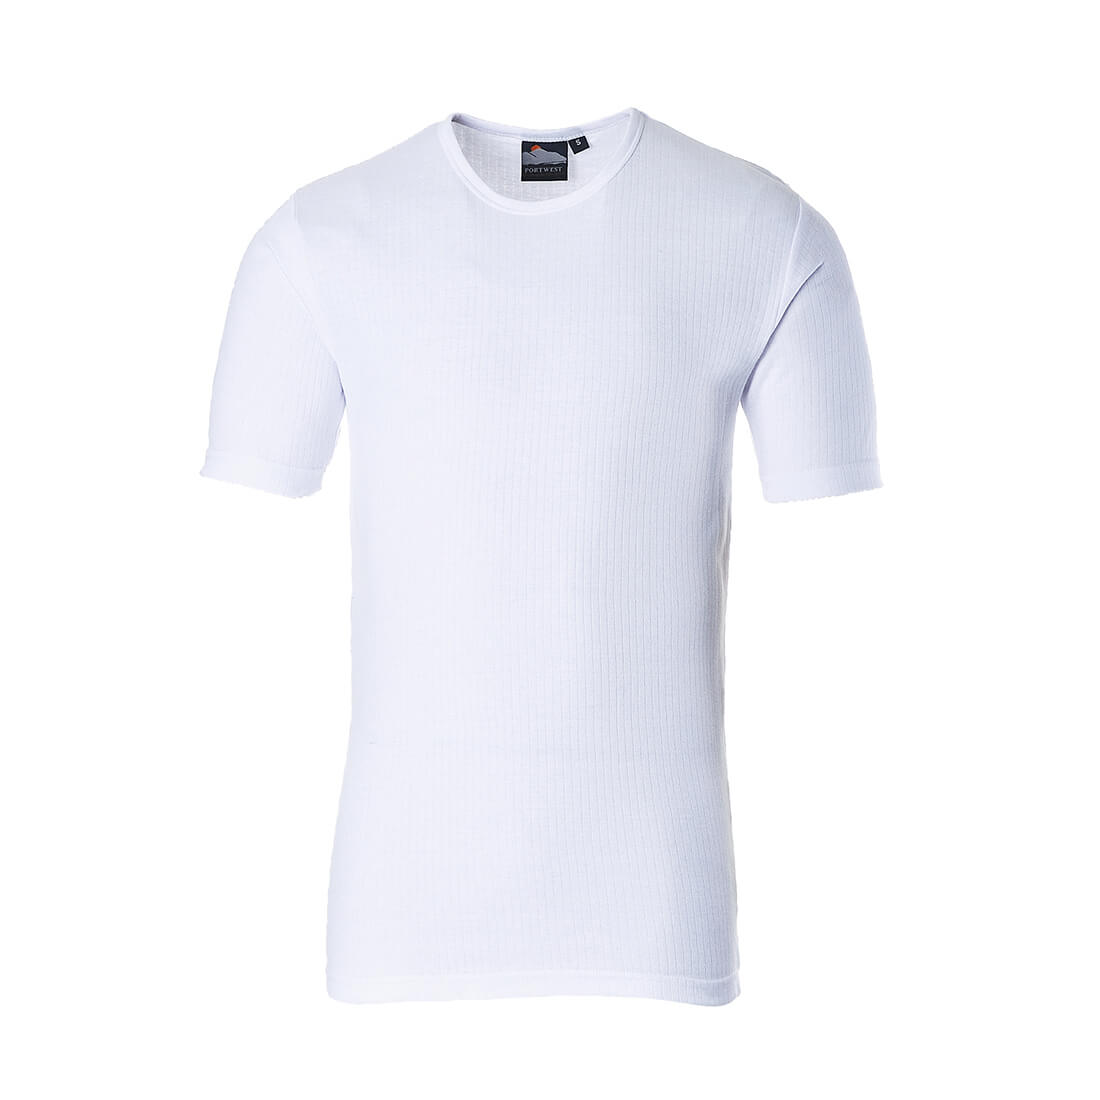 Image of Portwest Thermal Short Sleeve T Shirt White M